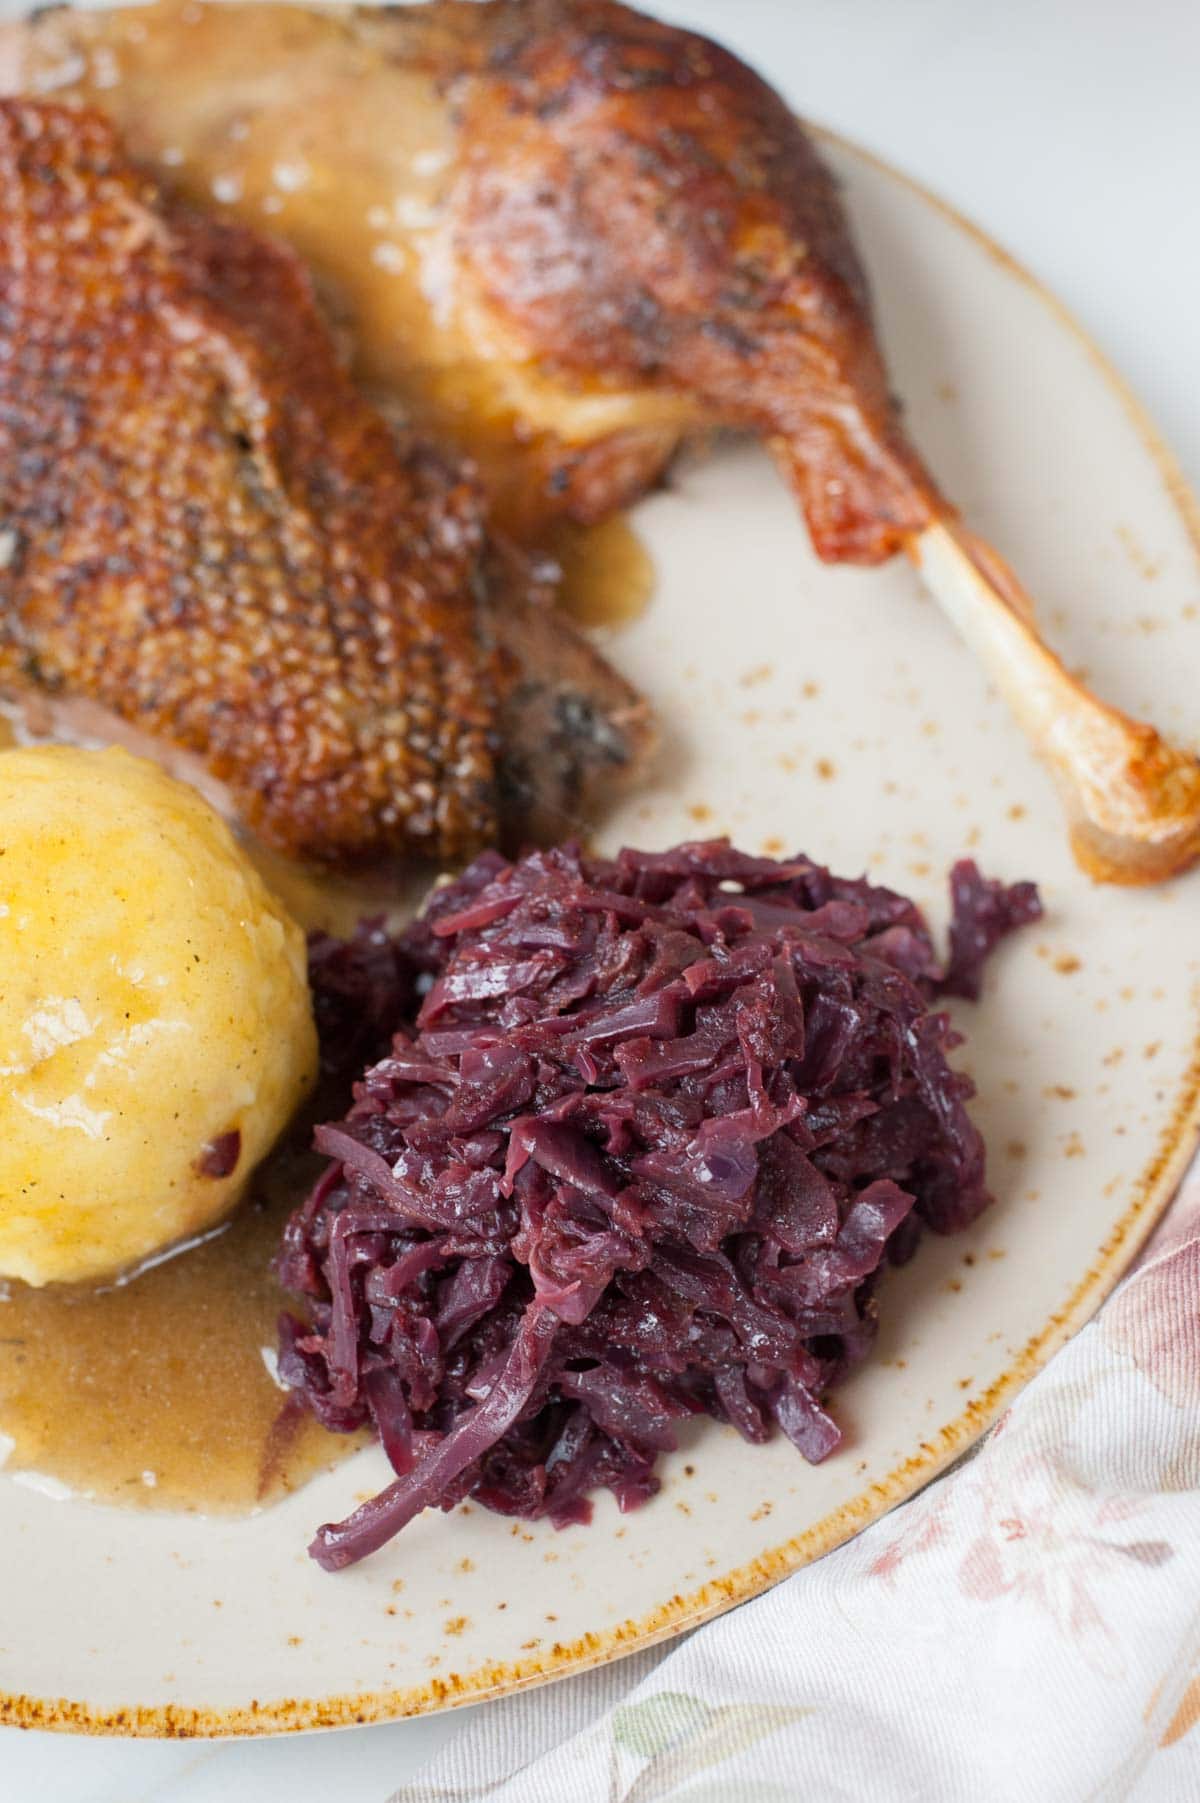 Braised red cabbage with apples on a brown plate served with roast goose, and potato dumplings.